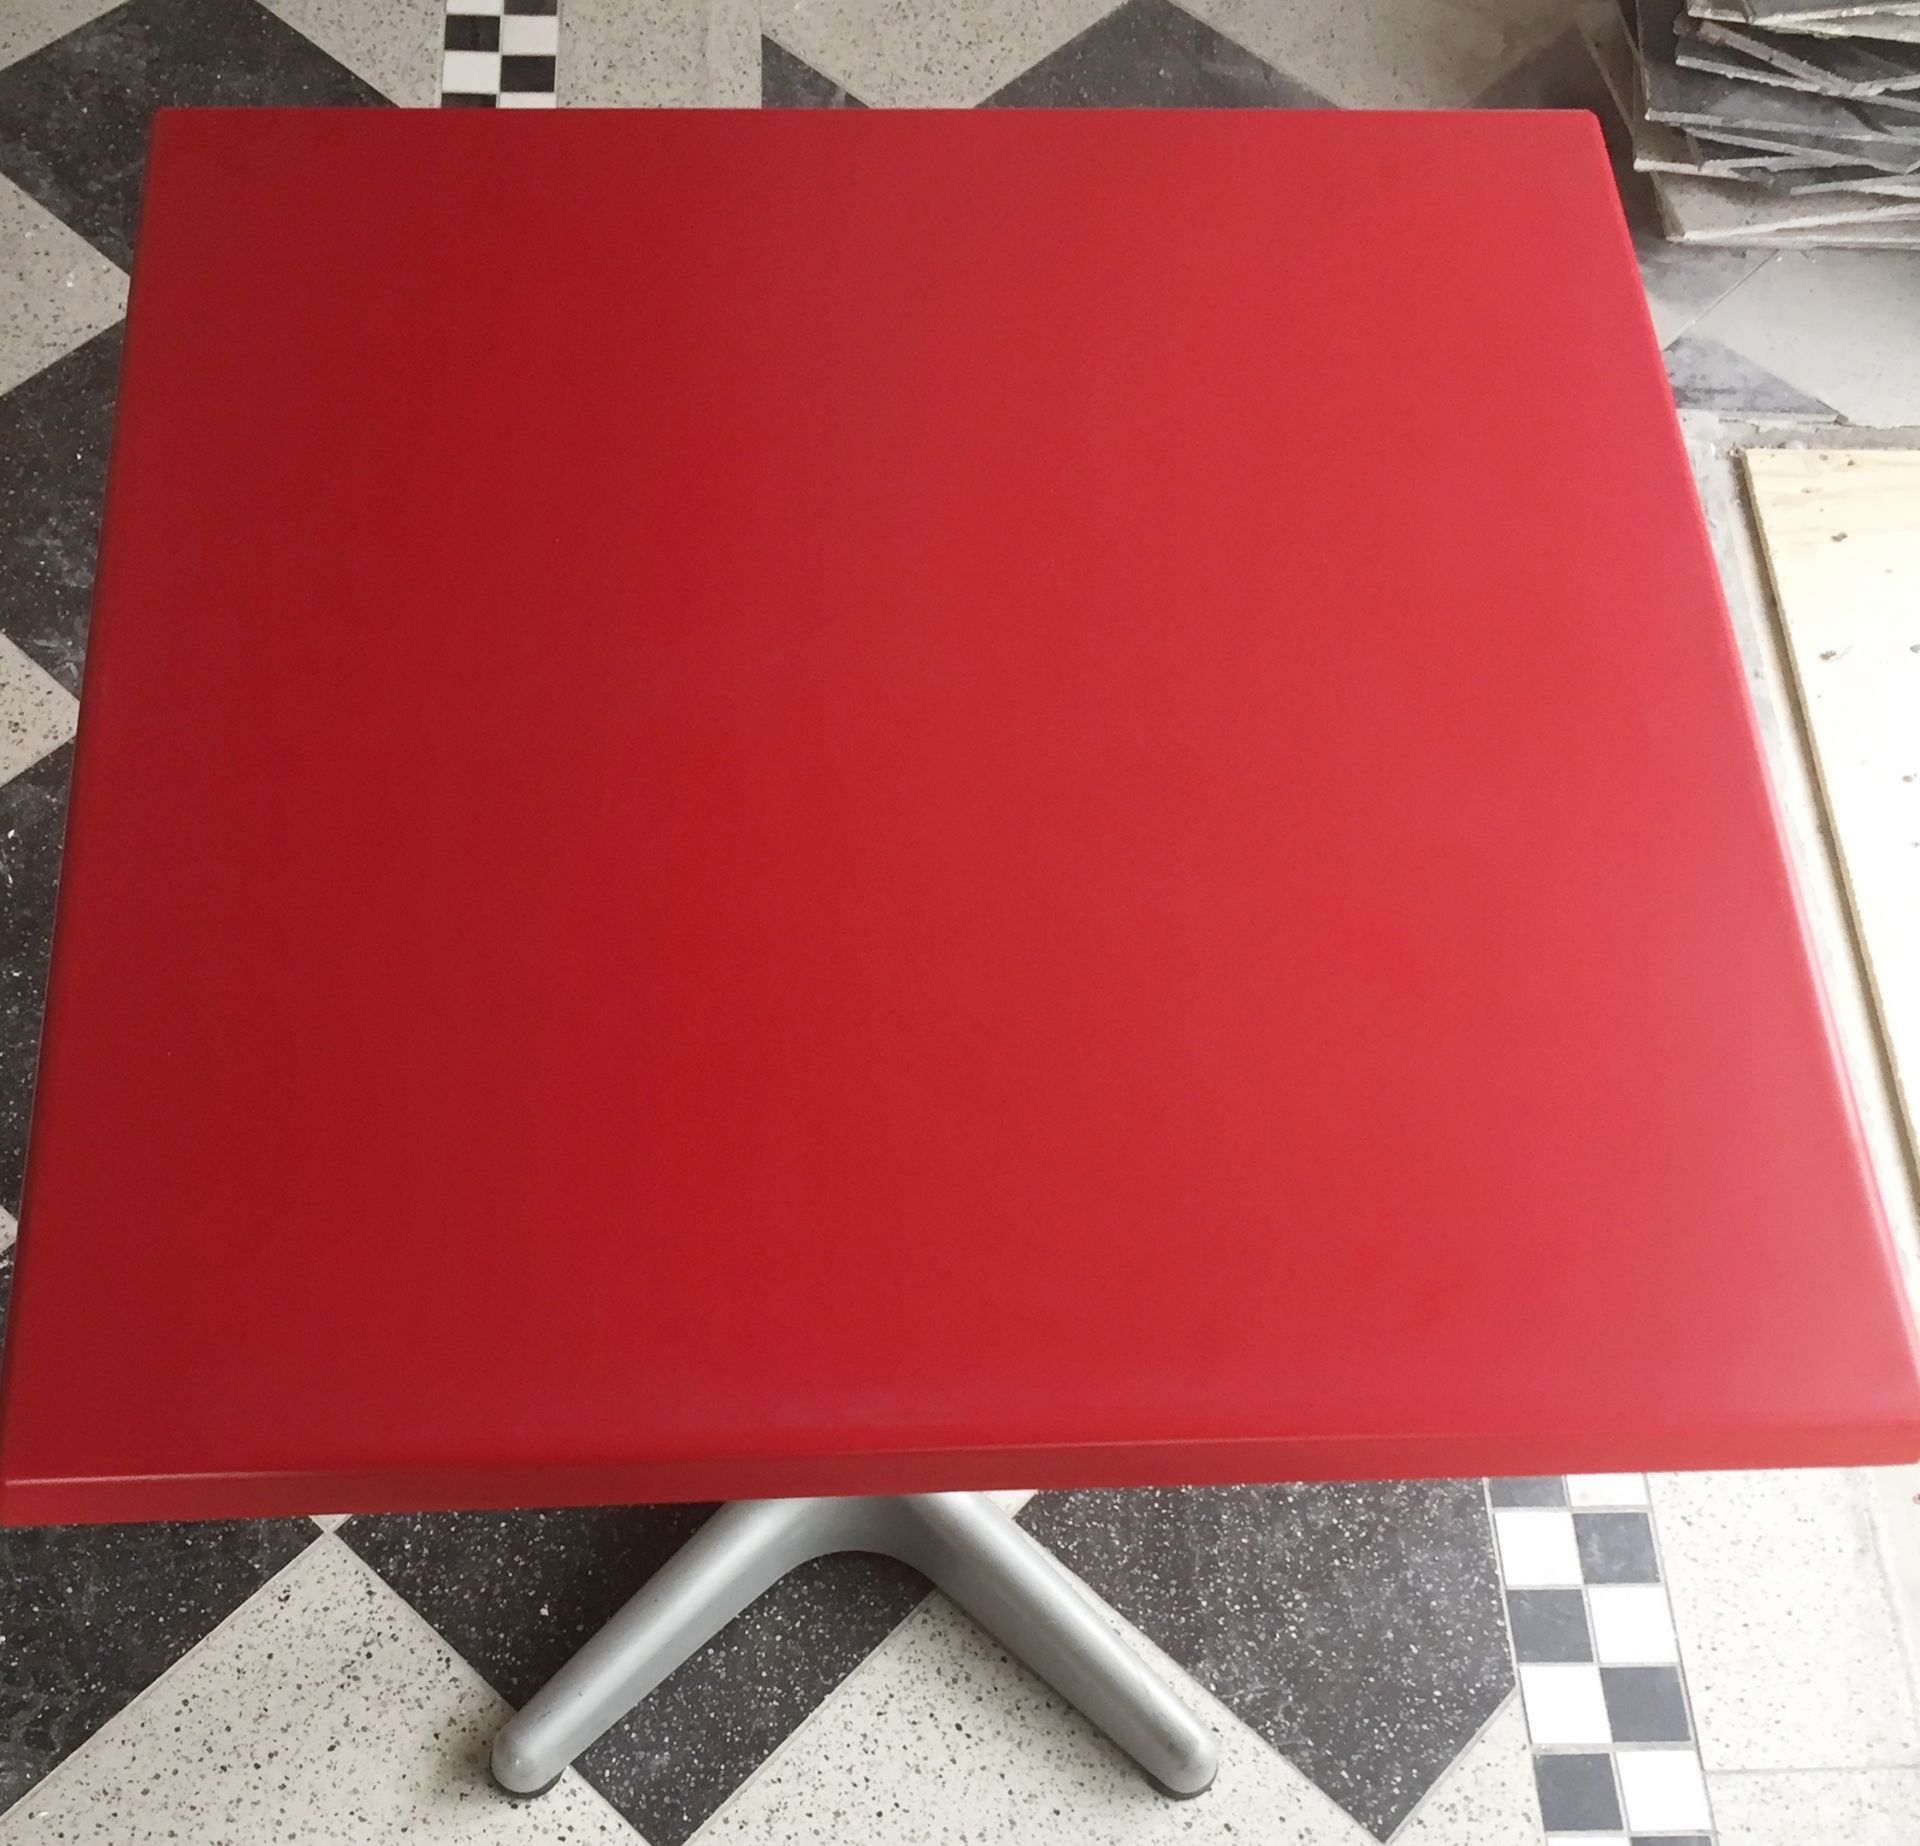 3 x Retro Square Bistro Tables - Red Tops With Silver Bases - CL235 - Location: London N1 These - Image 2 of 4